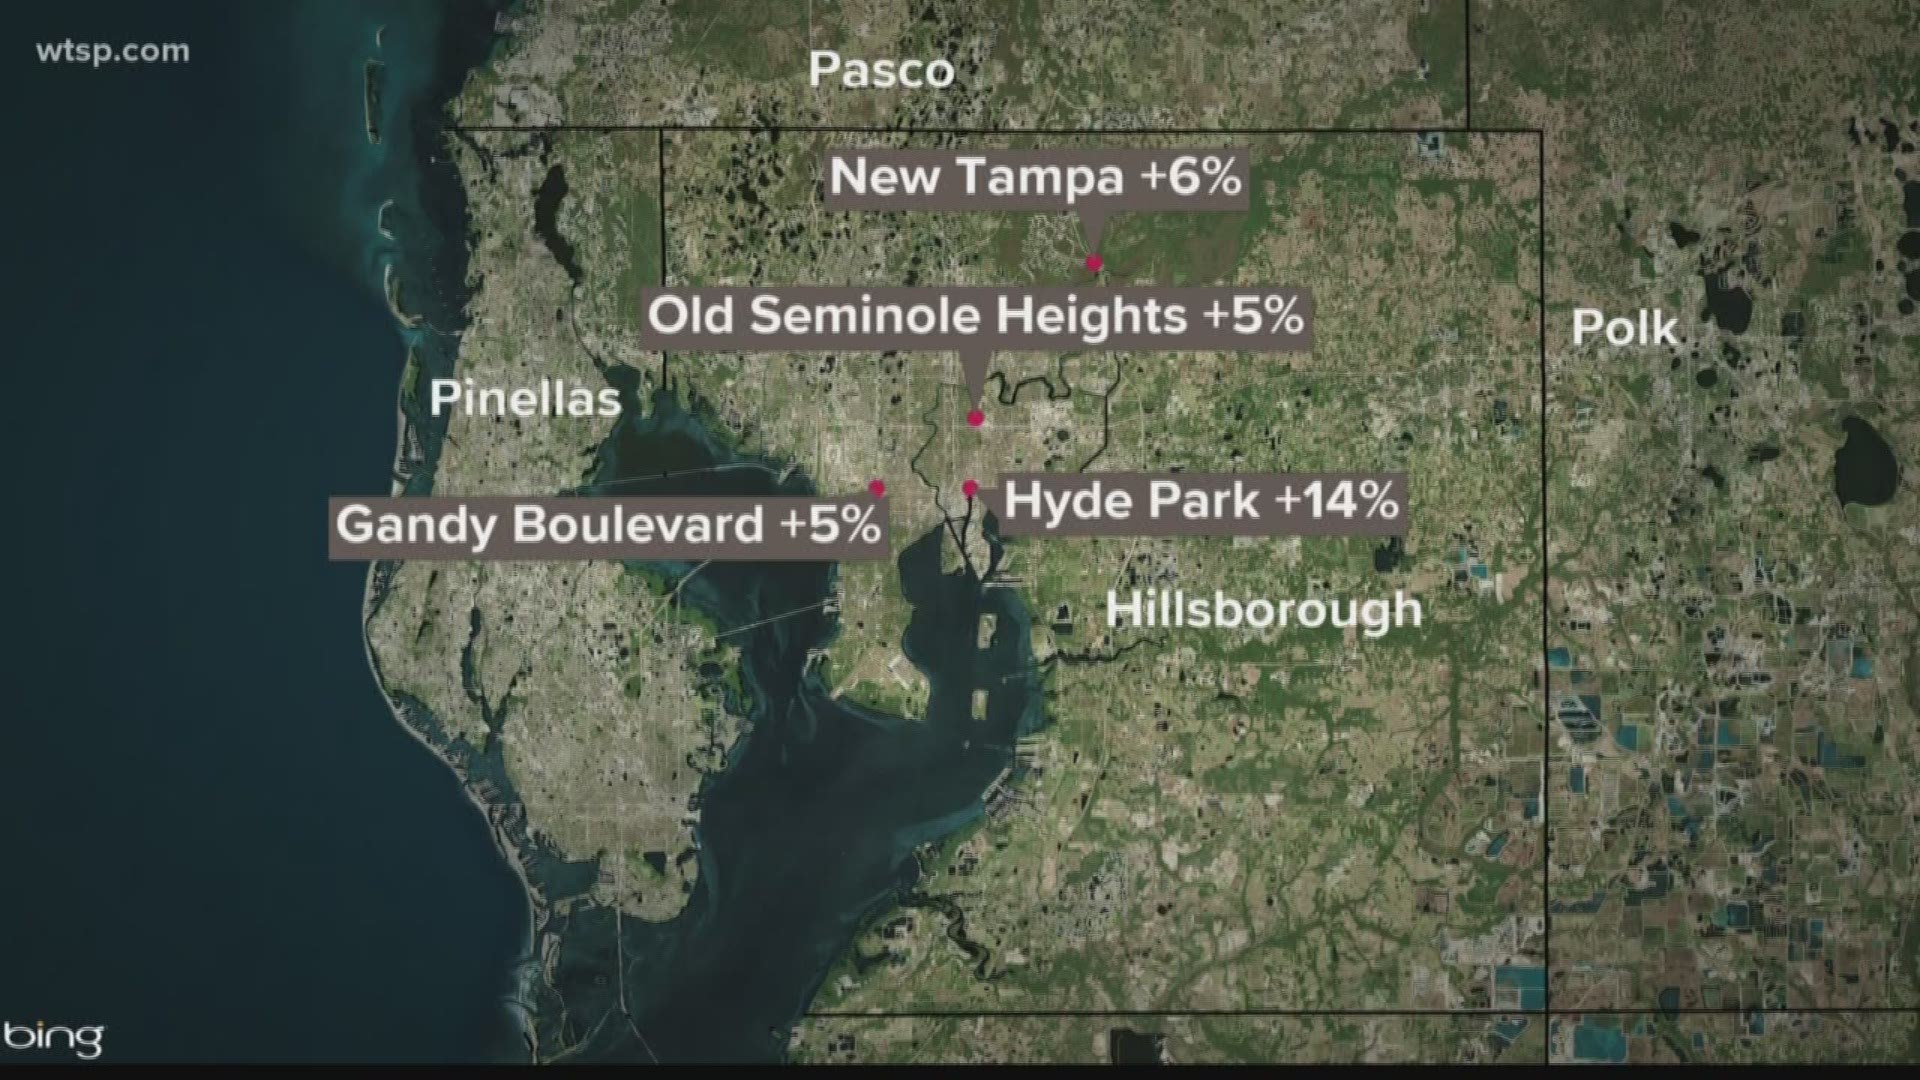 High rental costs are making buying Tampa real estate an attractive investment consideration for some people. https://on.wtsp.com/2lptXOR